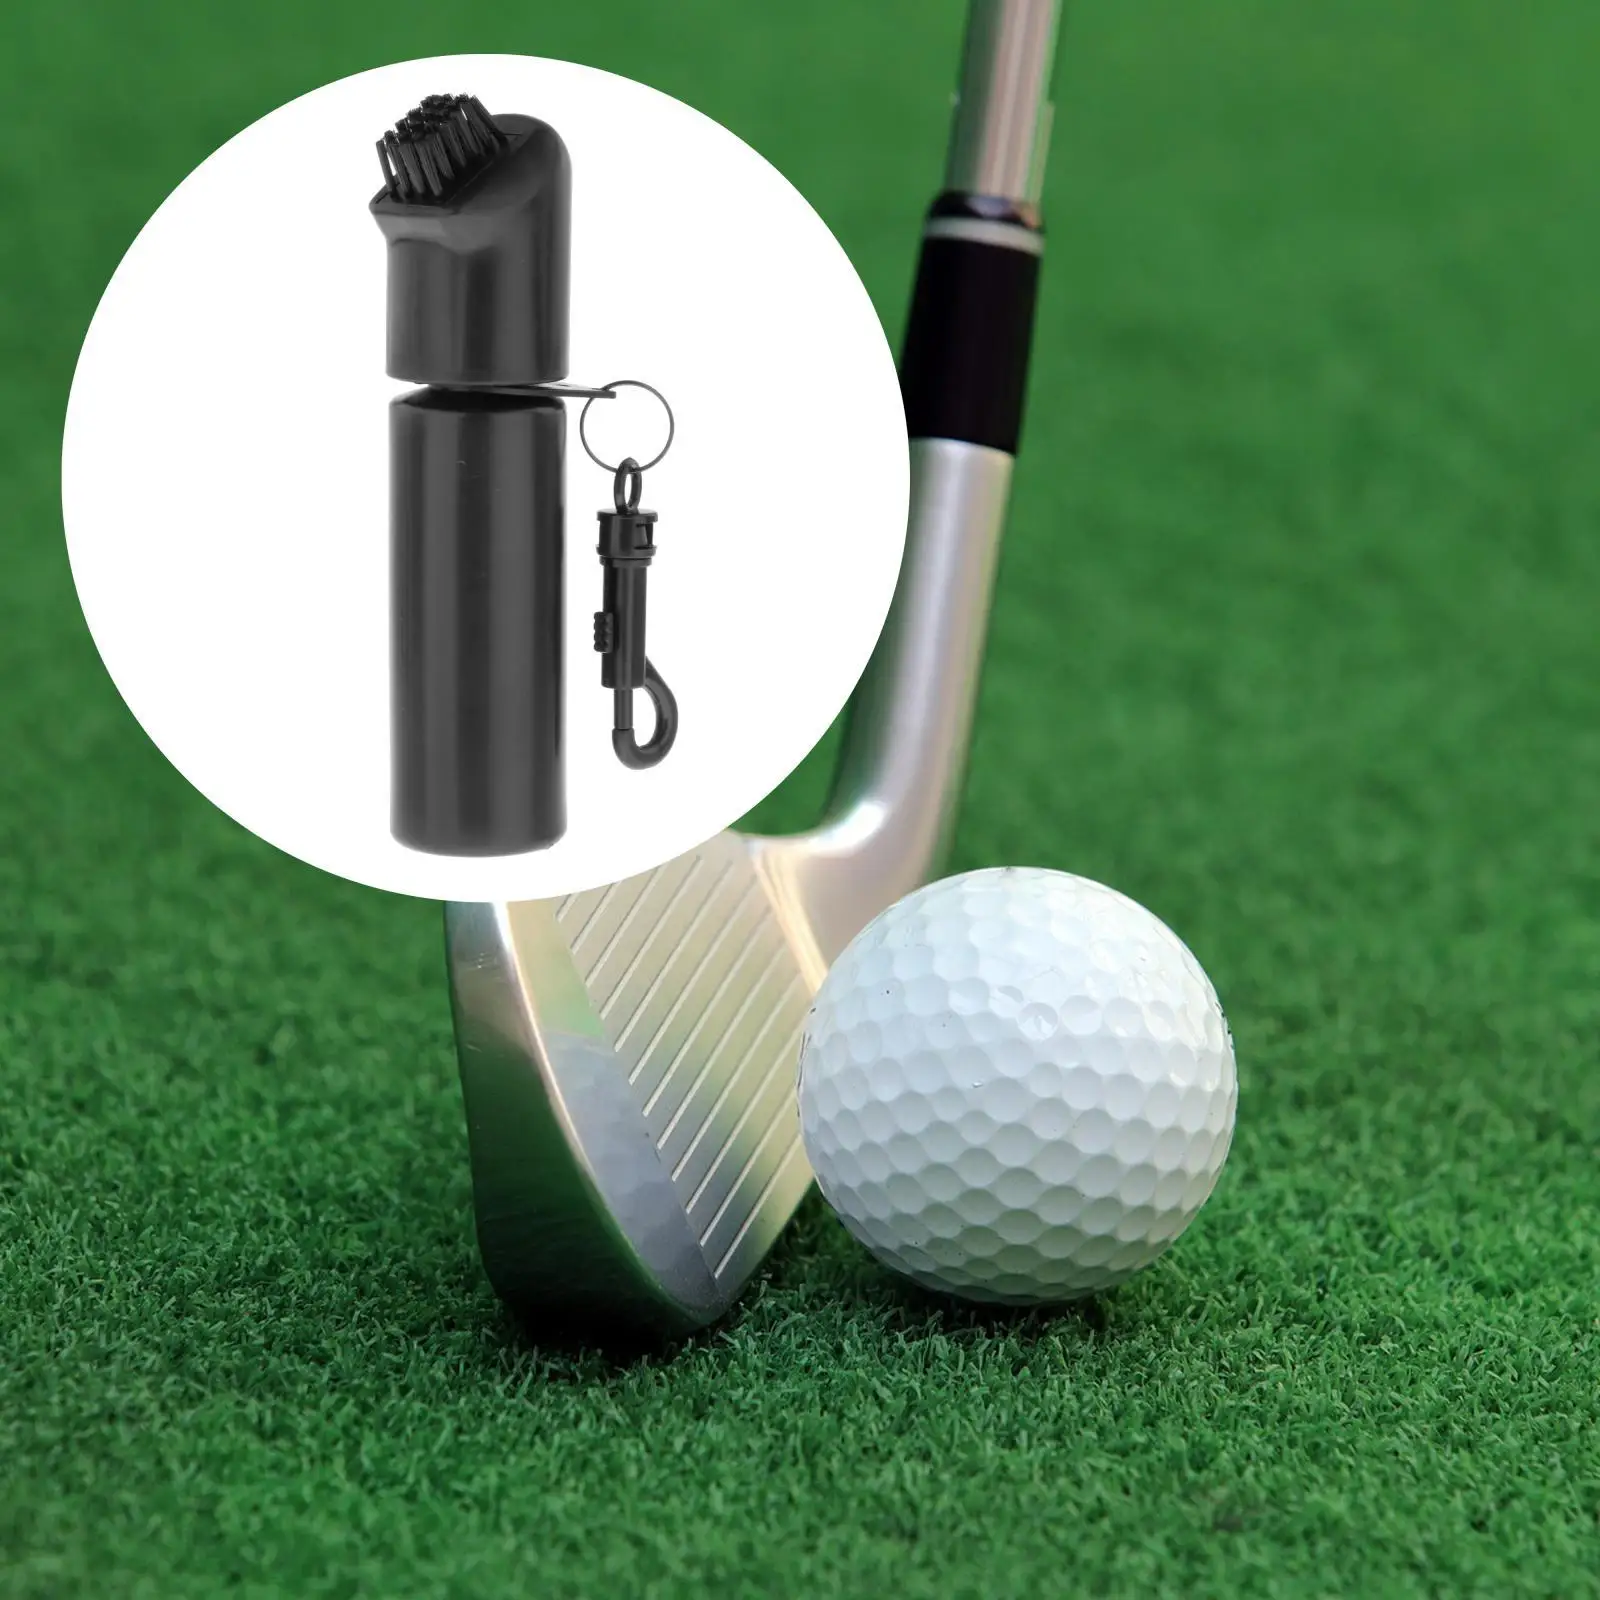 Portable Golf Club Brush, Groove Cleaner, Wide Coverage Self Contained Water